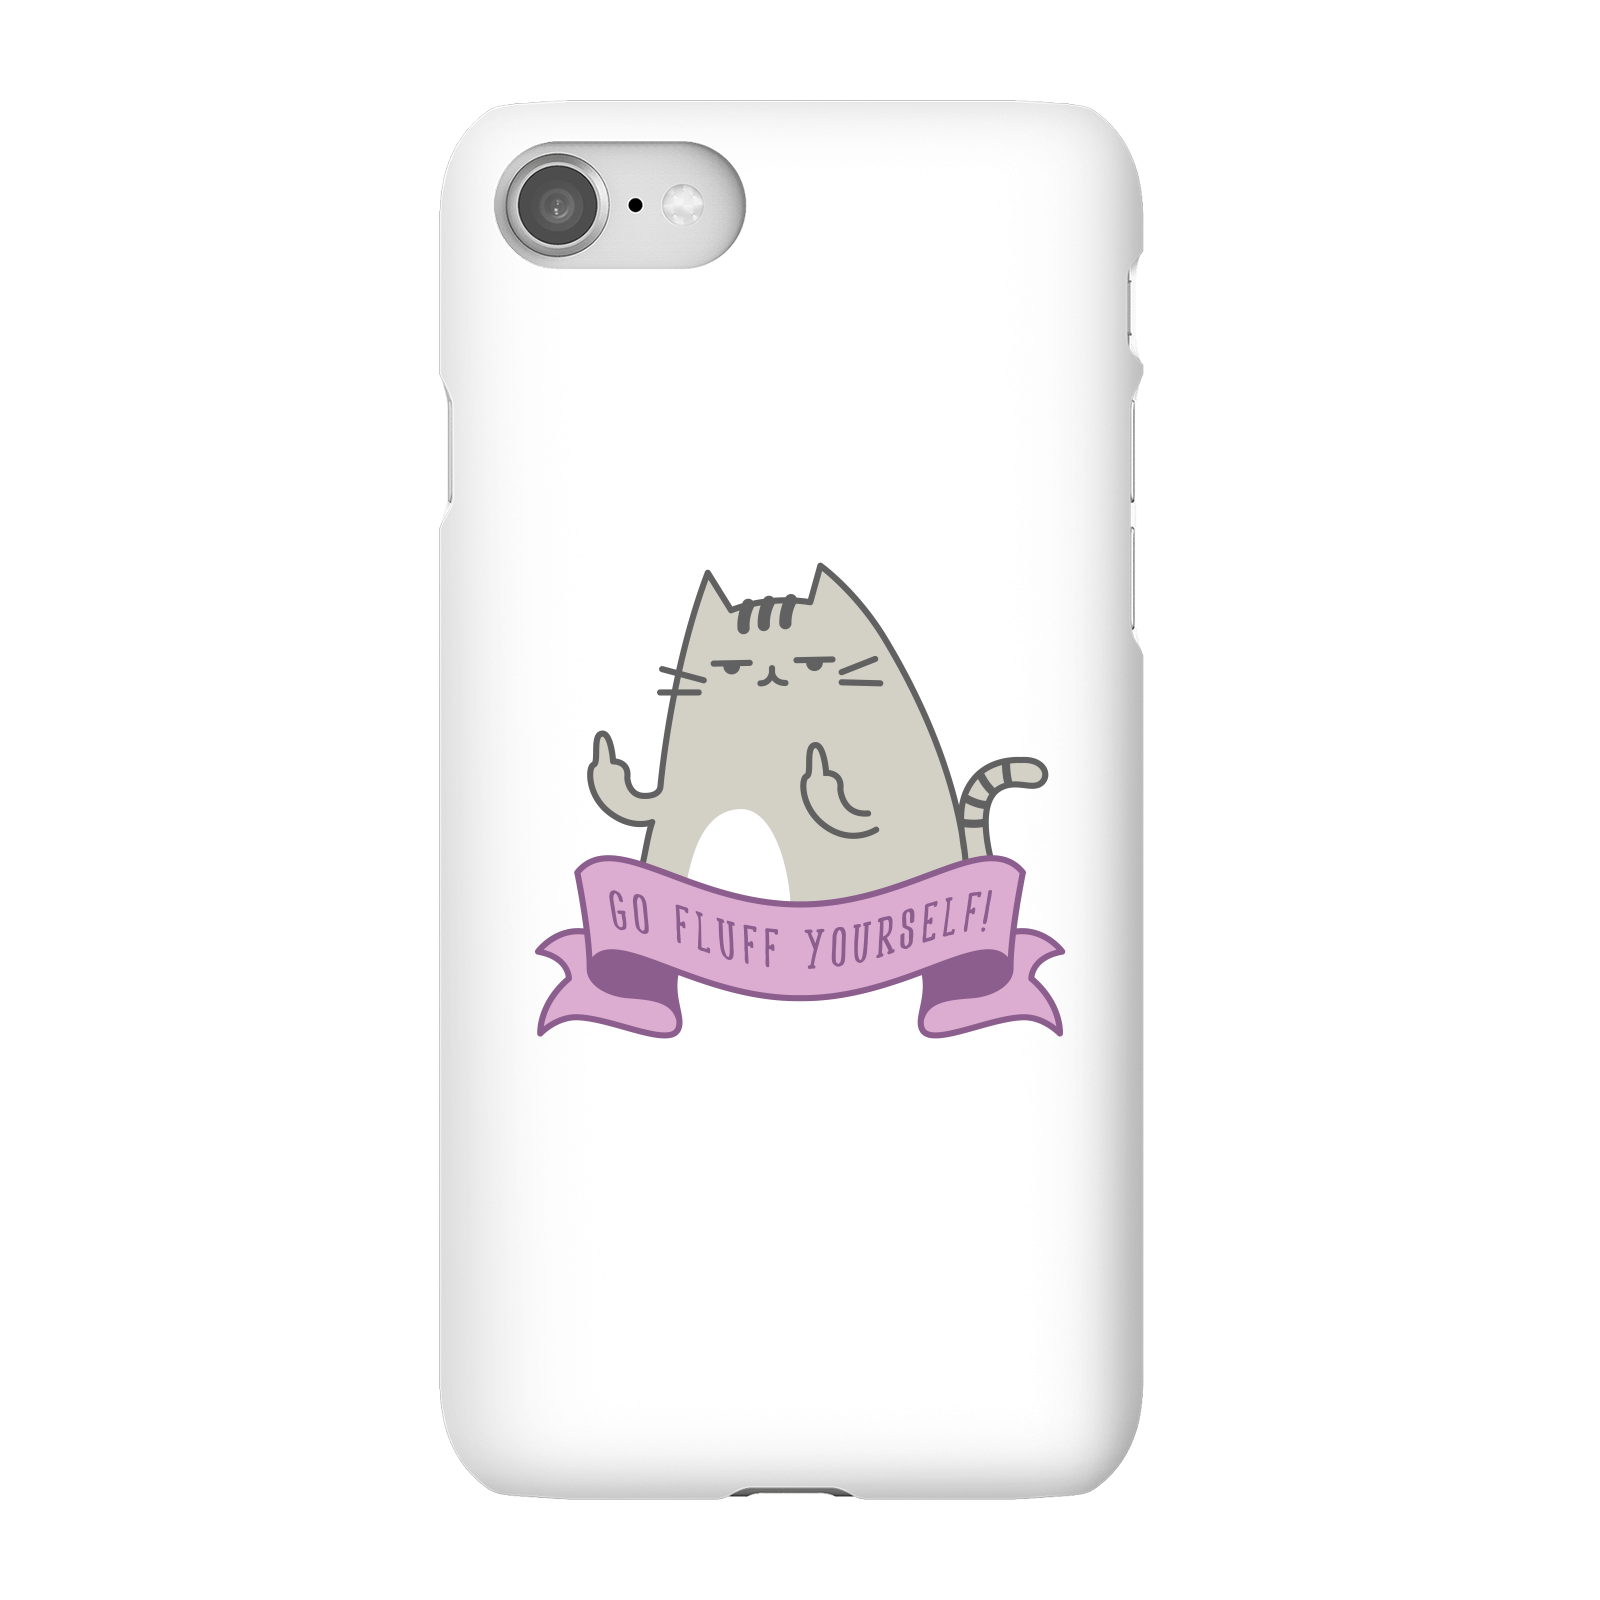 Go Fluff Yourself! Phone Case for iPhone and Android - iPhone 8 - Snap Case - Matte